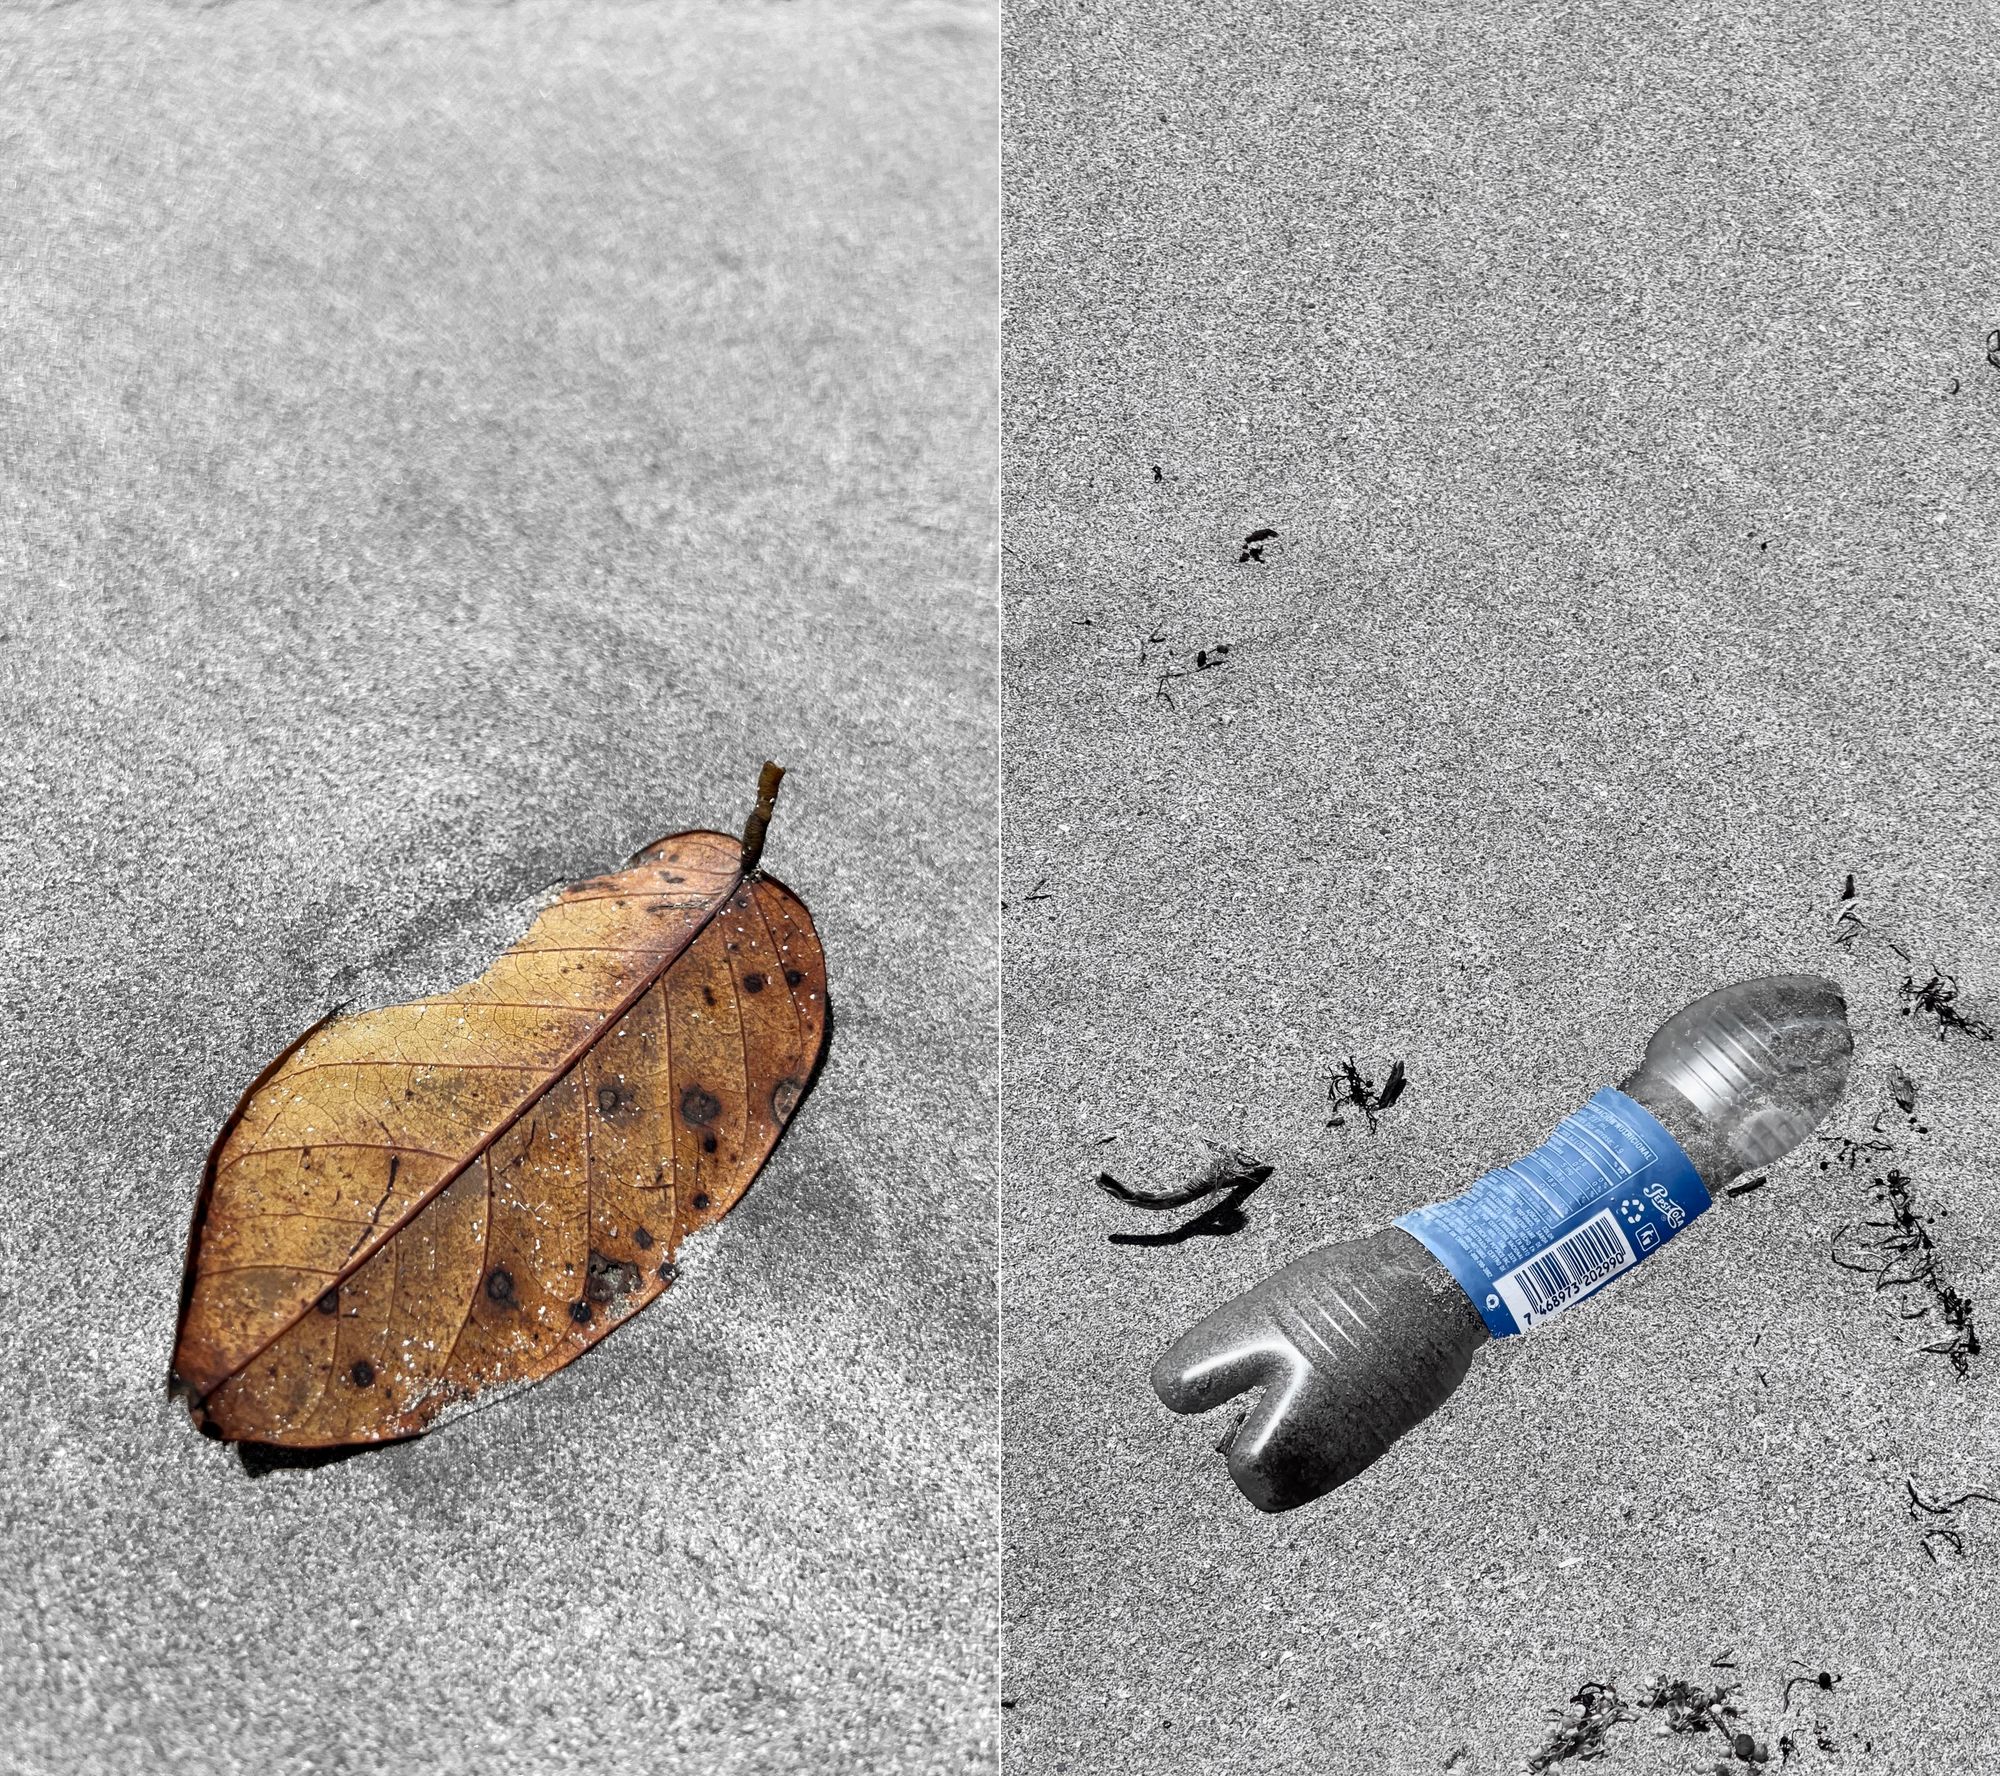 Did you know that it is estimated that a plastic bottle can take anywhere from 450 to 1000 years to decompose completely? However, for a leaf, it’s a matter of just a few years.